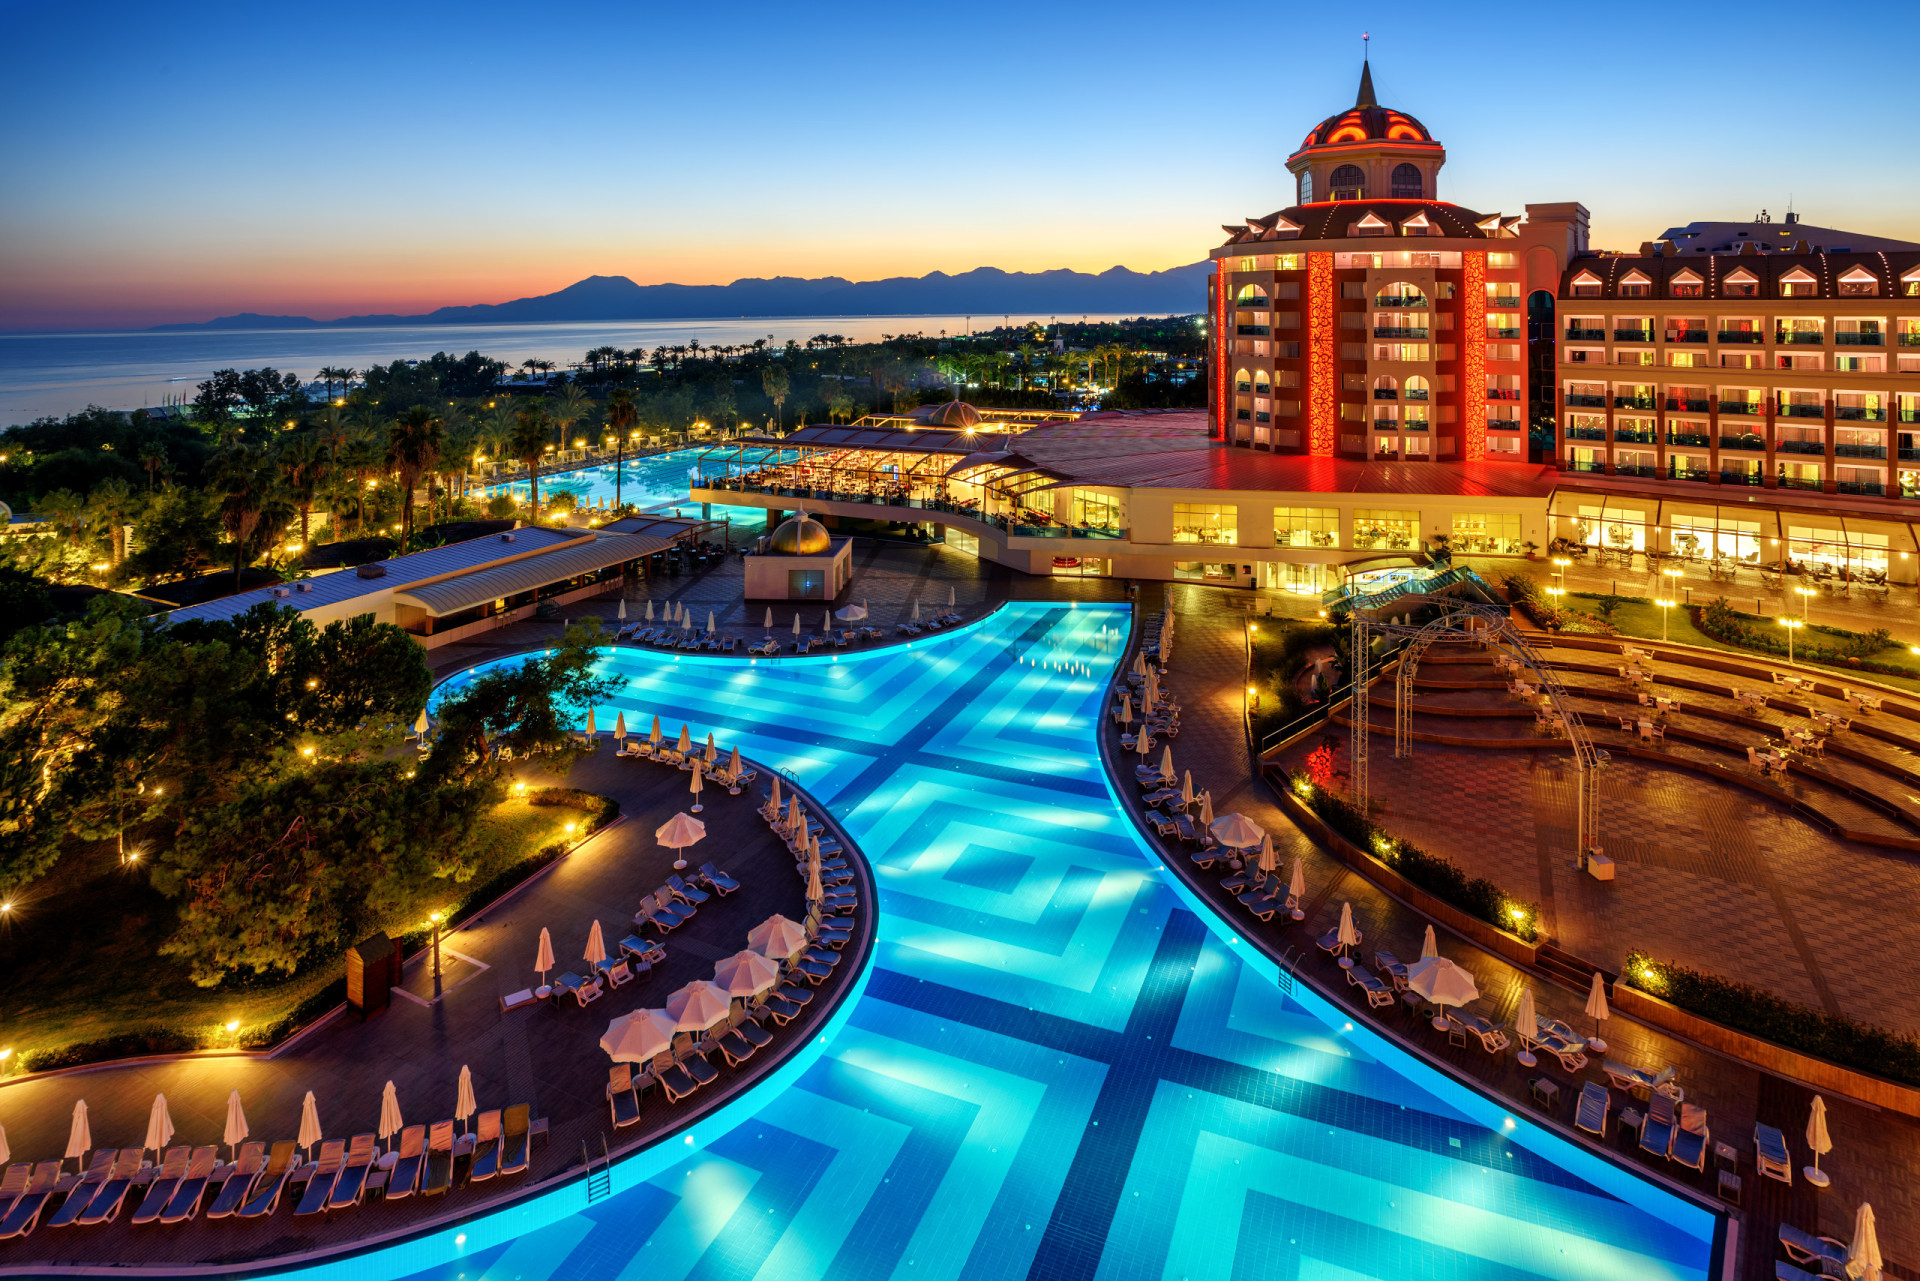 <p>All-inclusive resorts are found all over the world, in holiday destination hotspots such as the Mediterranean and the Far East.</p><p>You may also like:<a href="https://www.starsinsider.com/n/233061?utm_source=msn.com&utm_medium=display&utm_campaign=referral_description&utm_content=562106en-en"> 2000s heartthrobs: where are they now?</a></p>